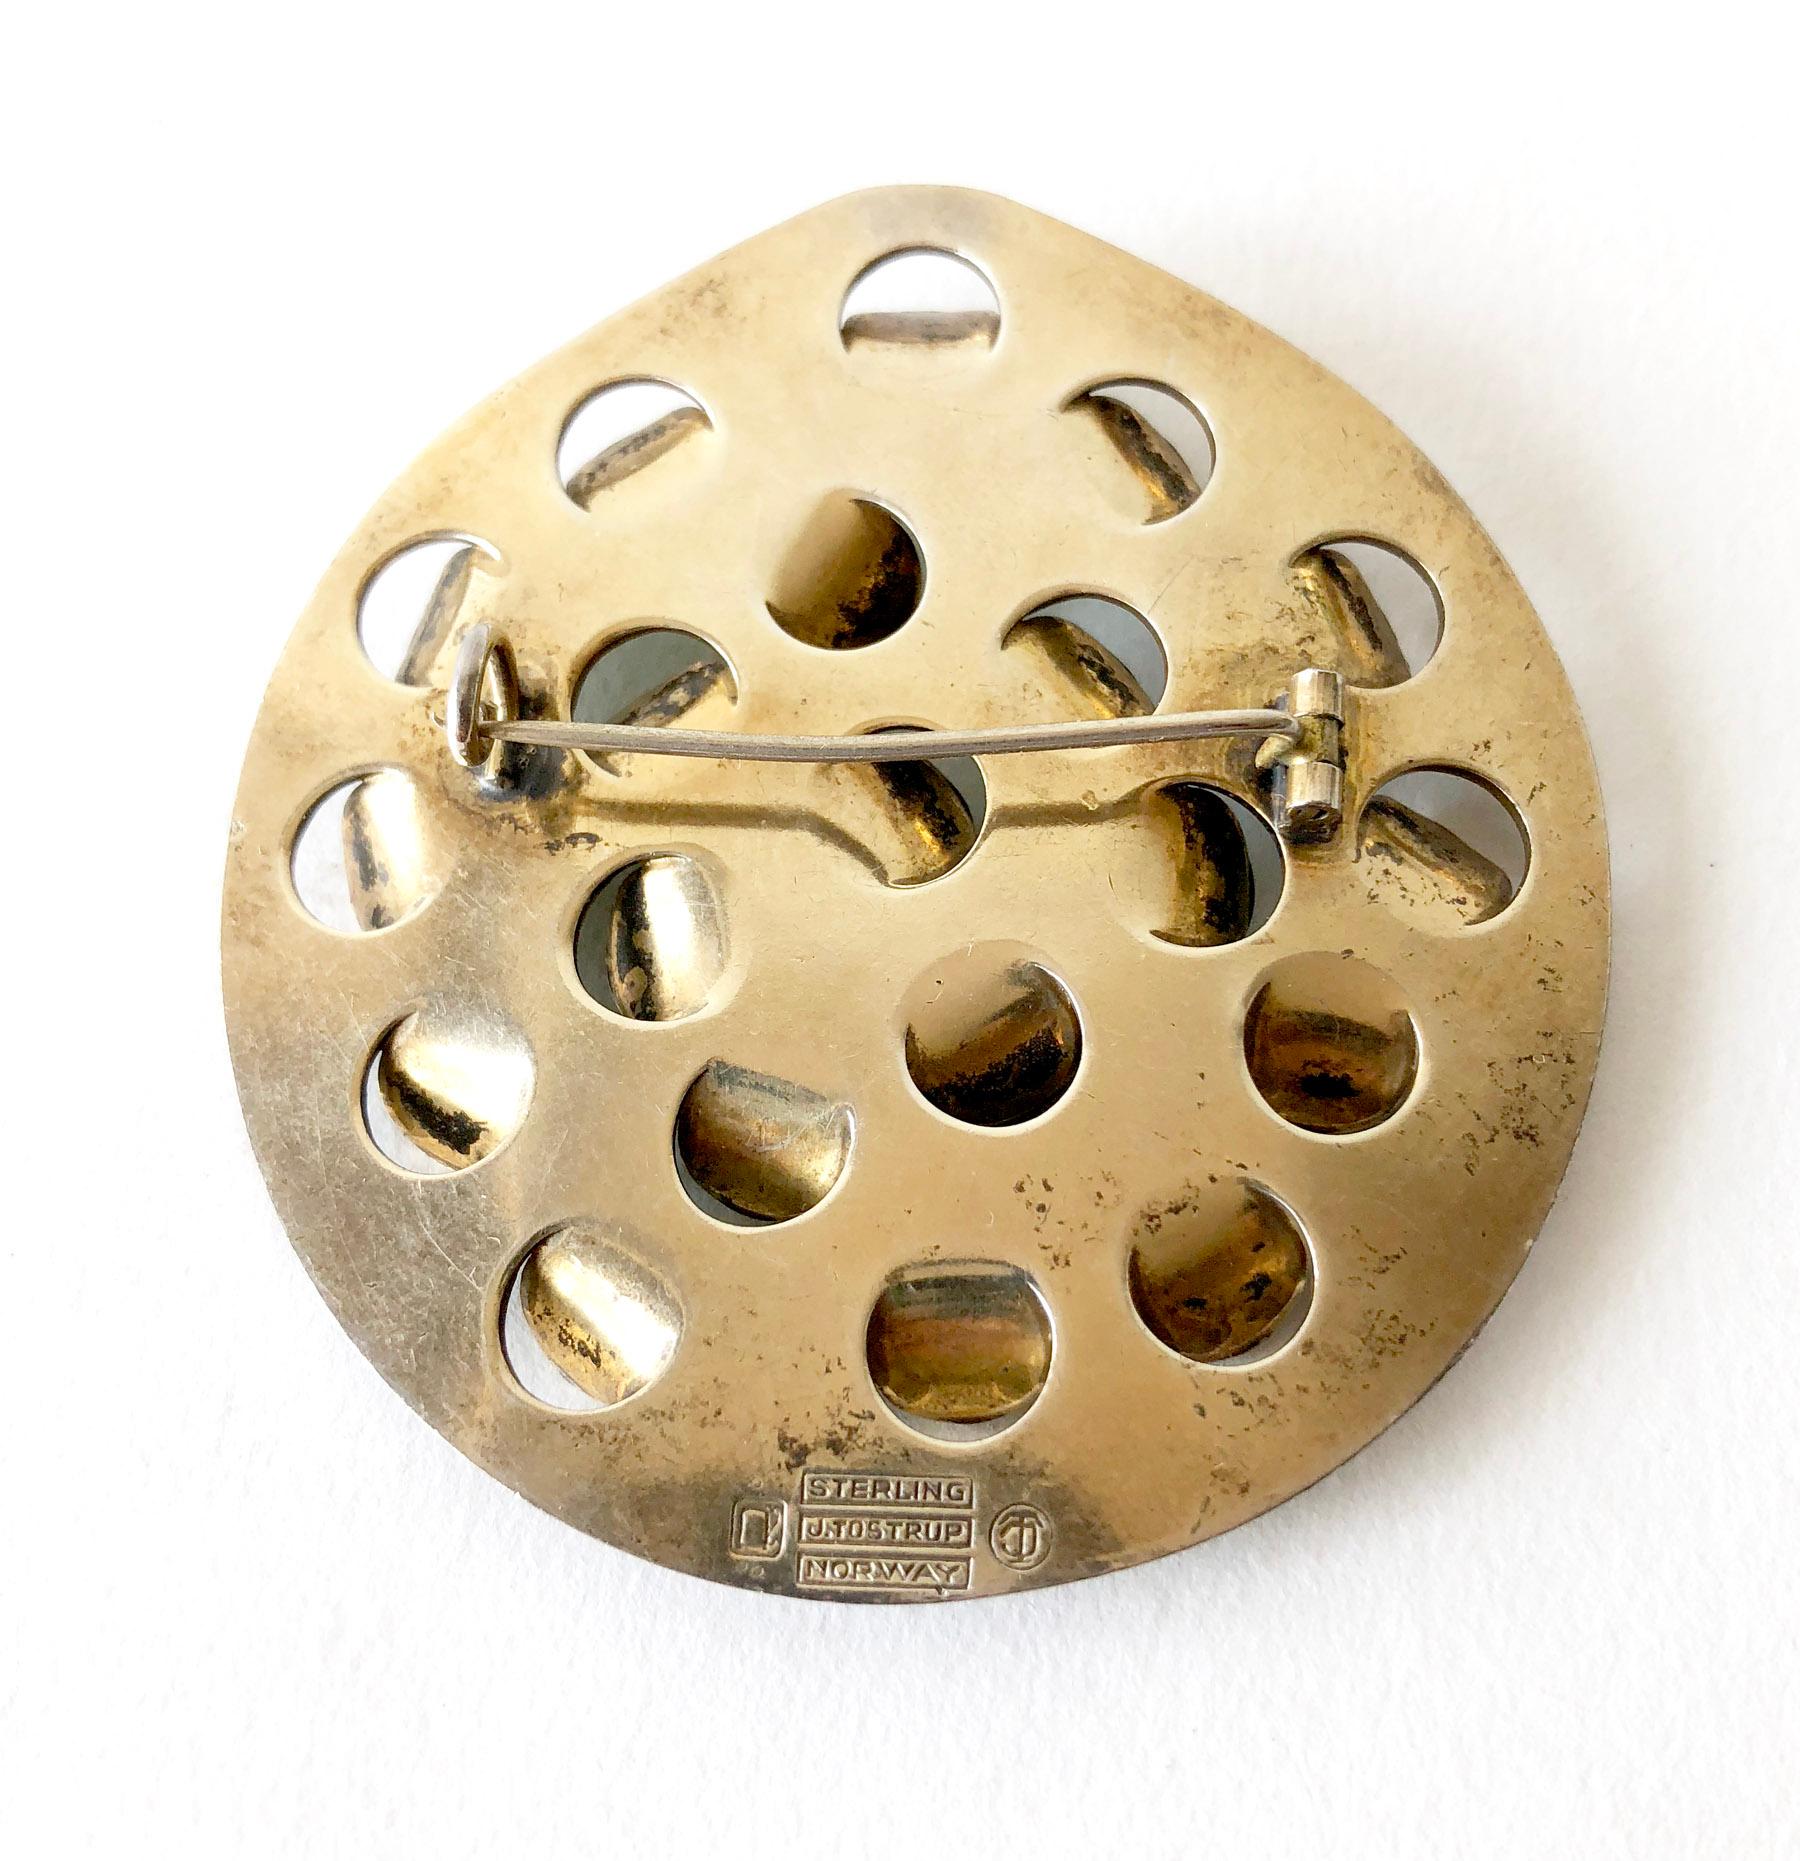 Iconic, lightly gold plated sterling silver brooch with emerald green enameled scales or tabs created by Grete Prytz Kittelsen of Oslo, Norway.  Brooch measures 2.25